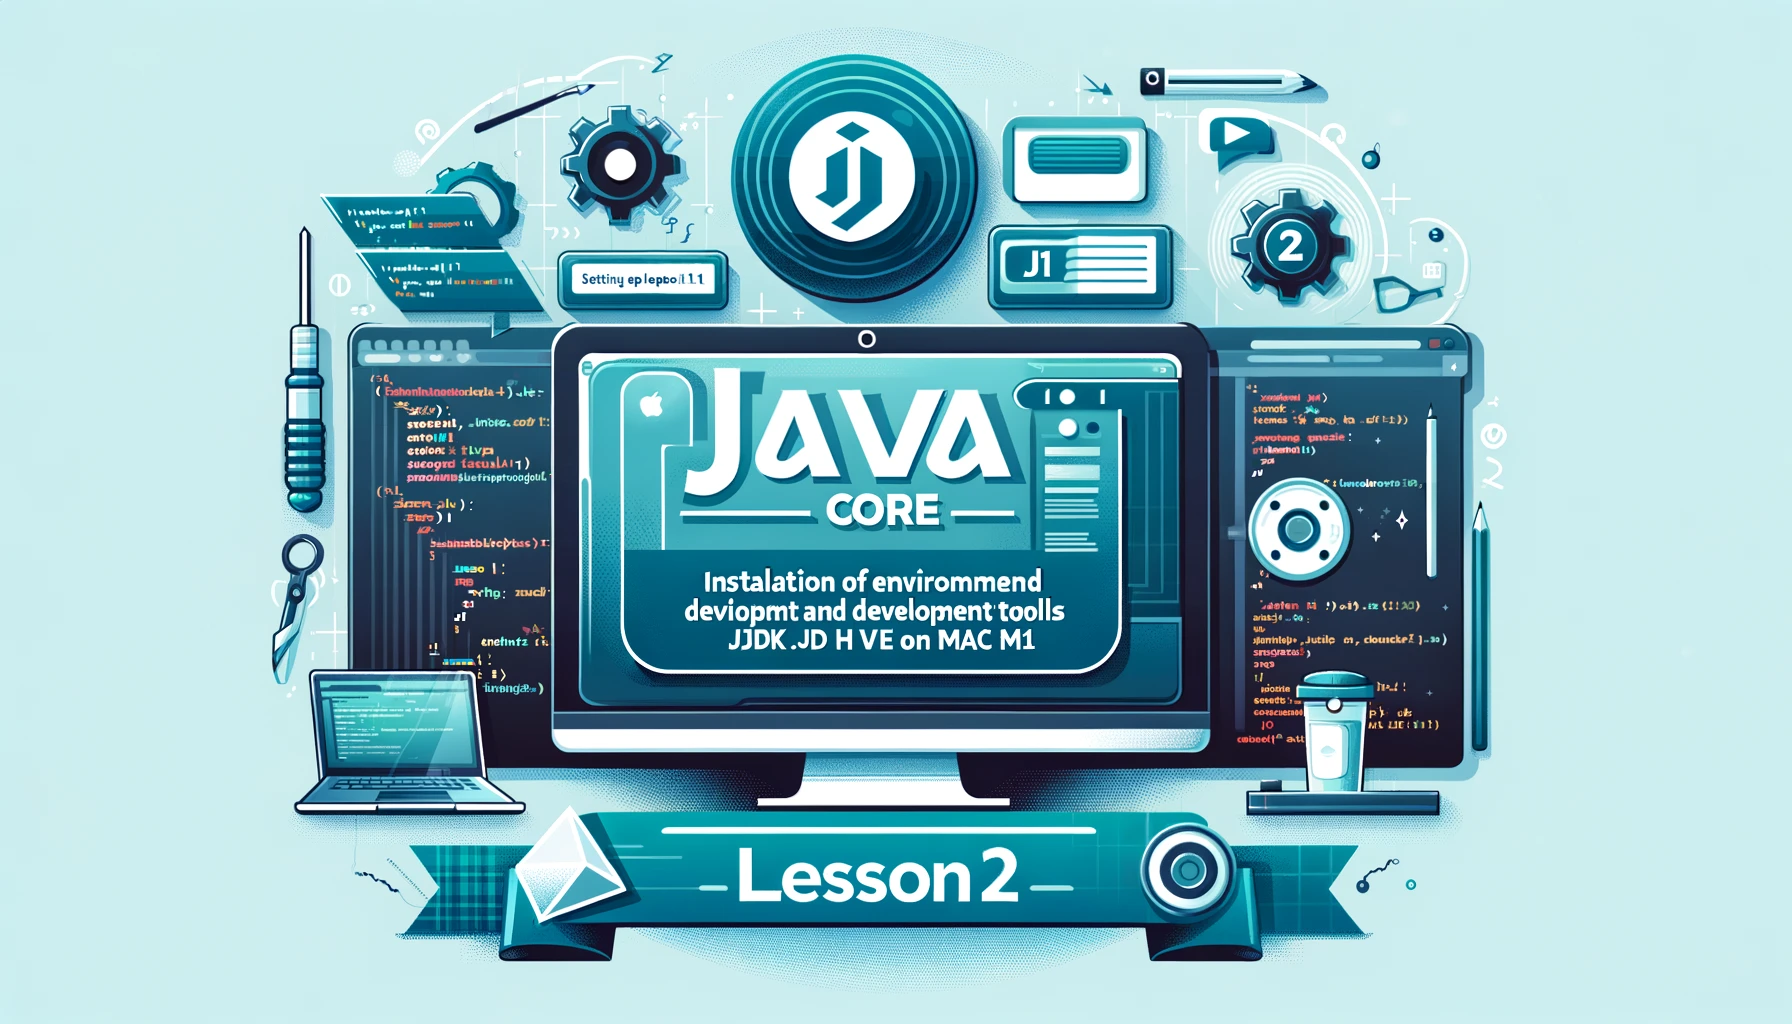 Lesson 2 - Install JDK 11 development environment and tools and set up Java Home on Mac M1